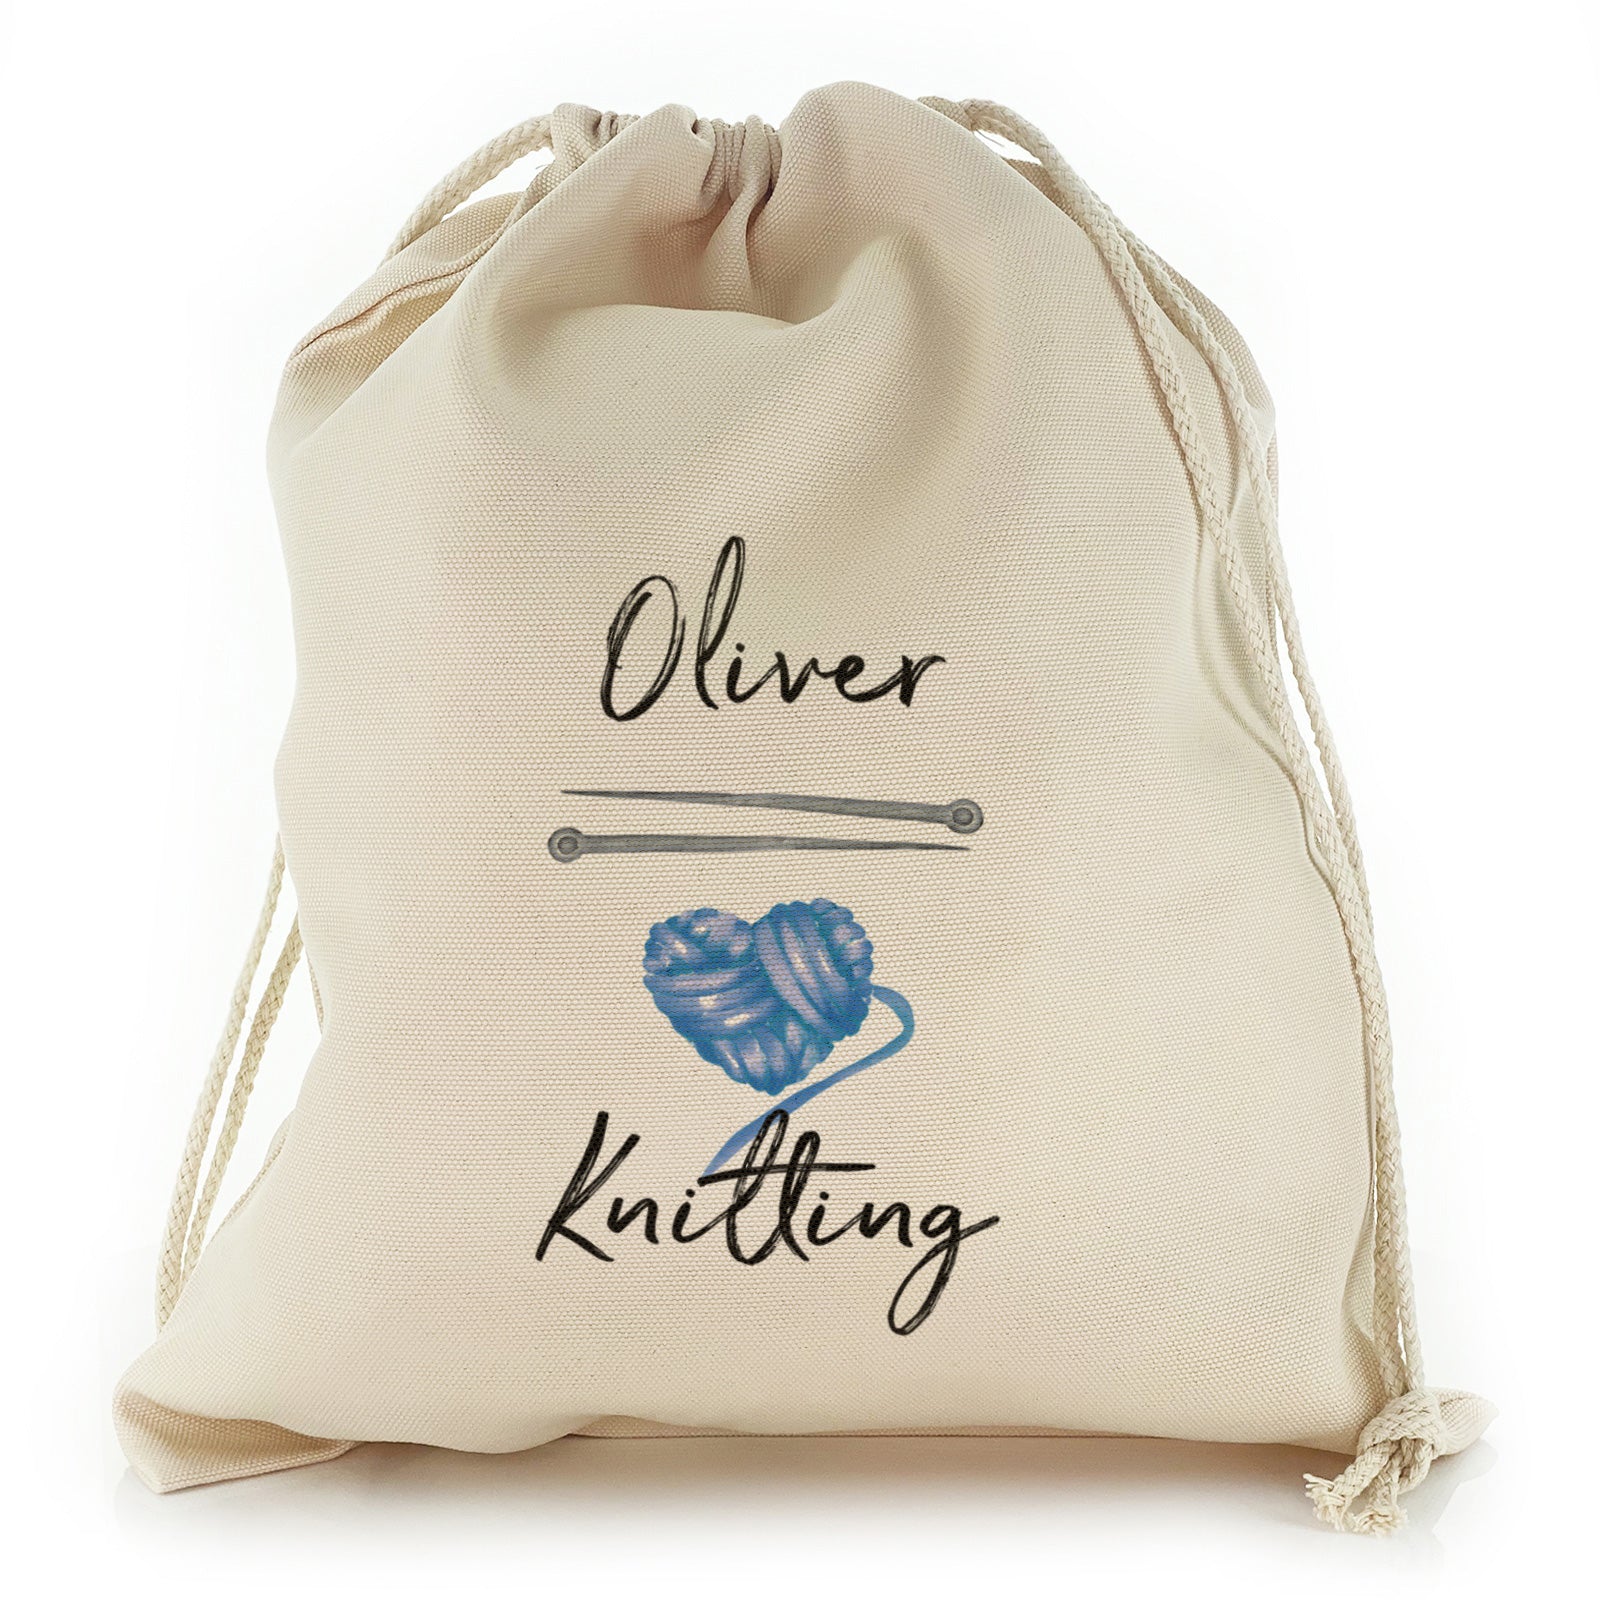 Personalised Canvas Sack with Stylish Text on Blue Yarn Heart and Needles Design